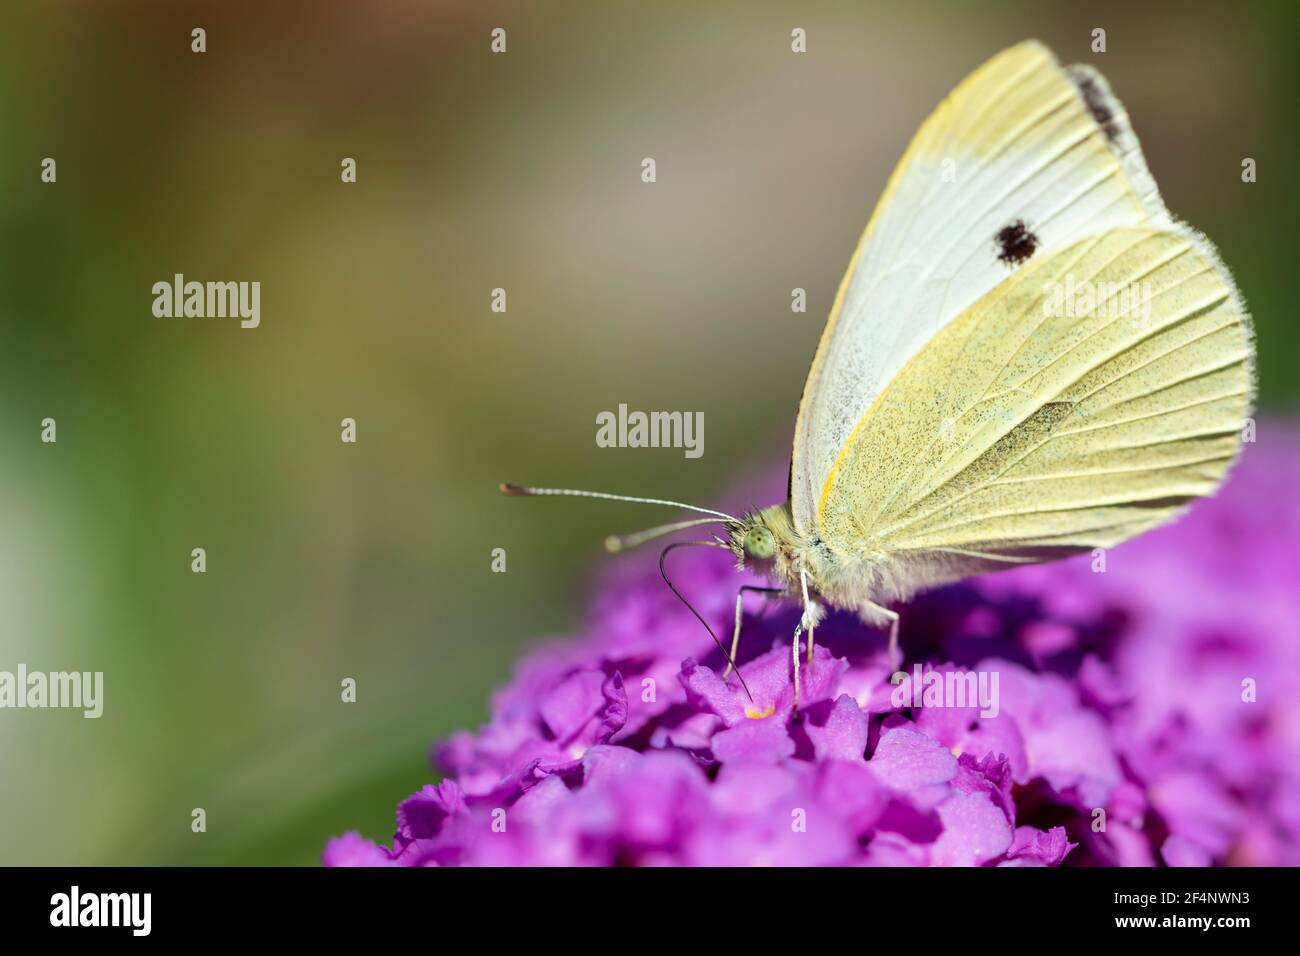 A portrait of a cabbage white butterfly, also known as a small white or cabbage butterfly sitting on the flowers of a pink delight or buddleja bush, f Stock Photo